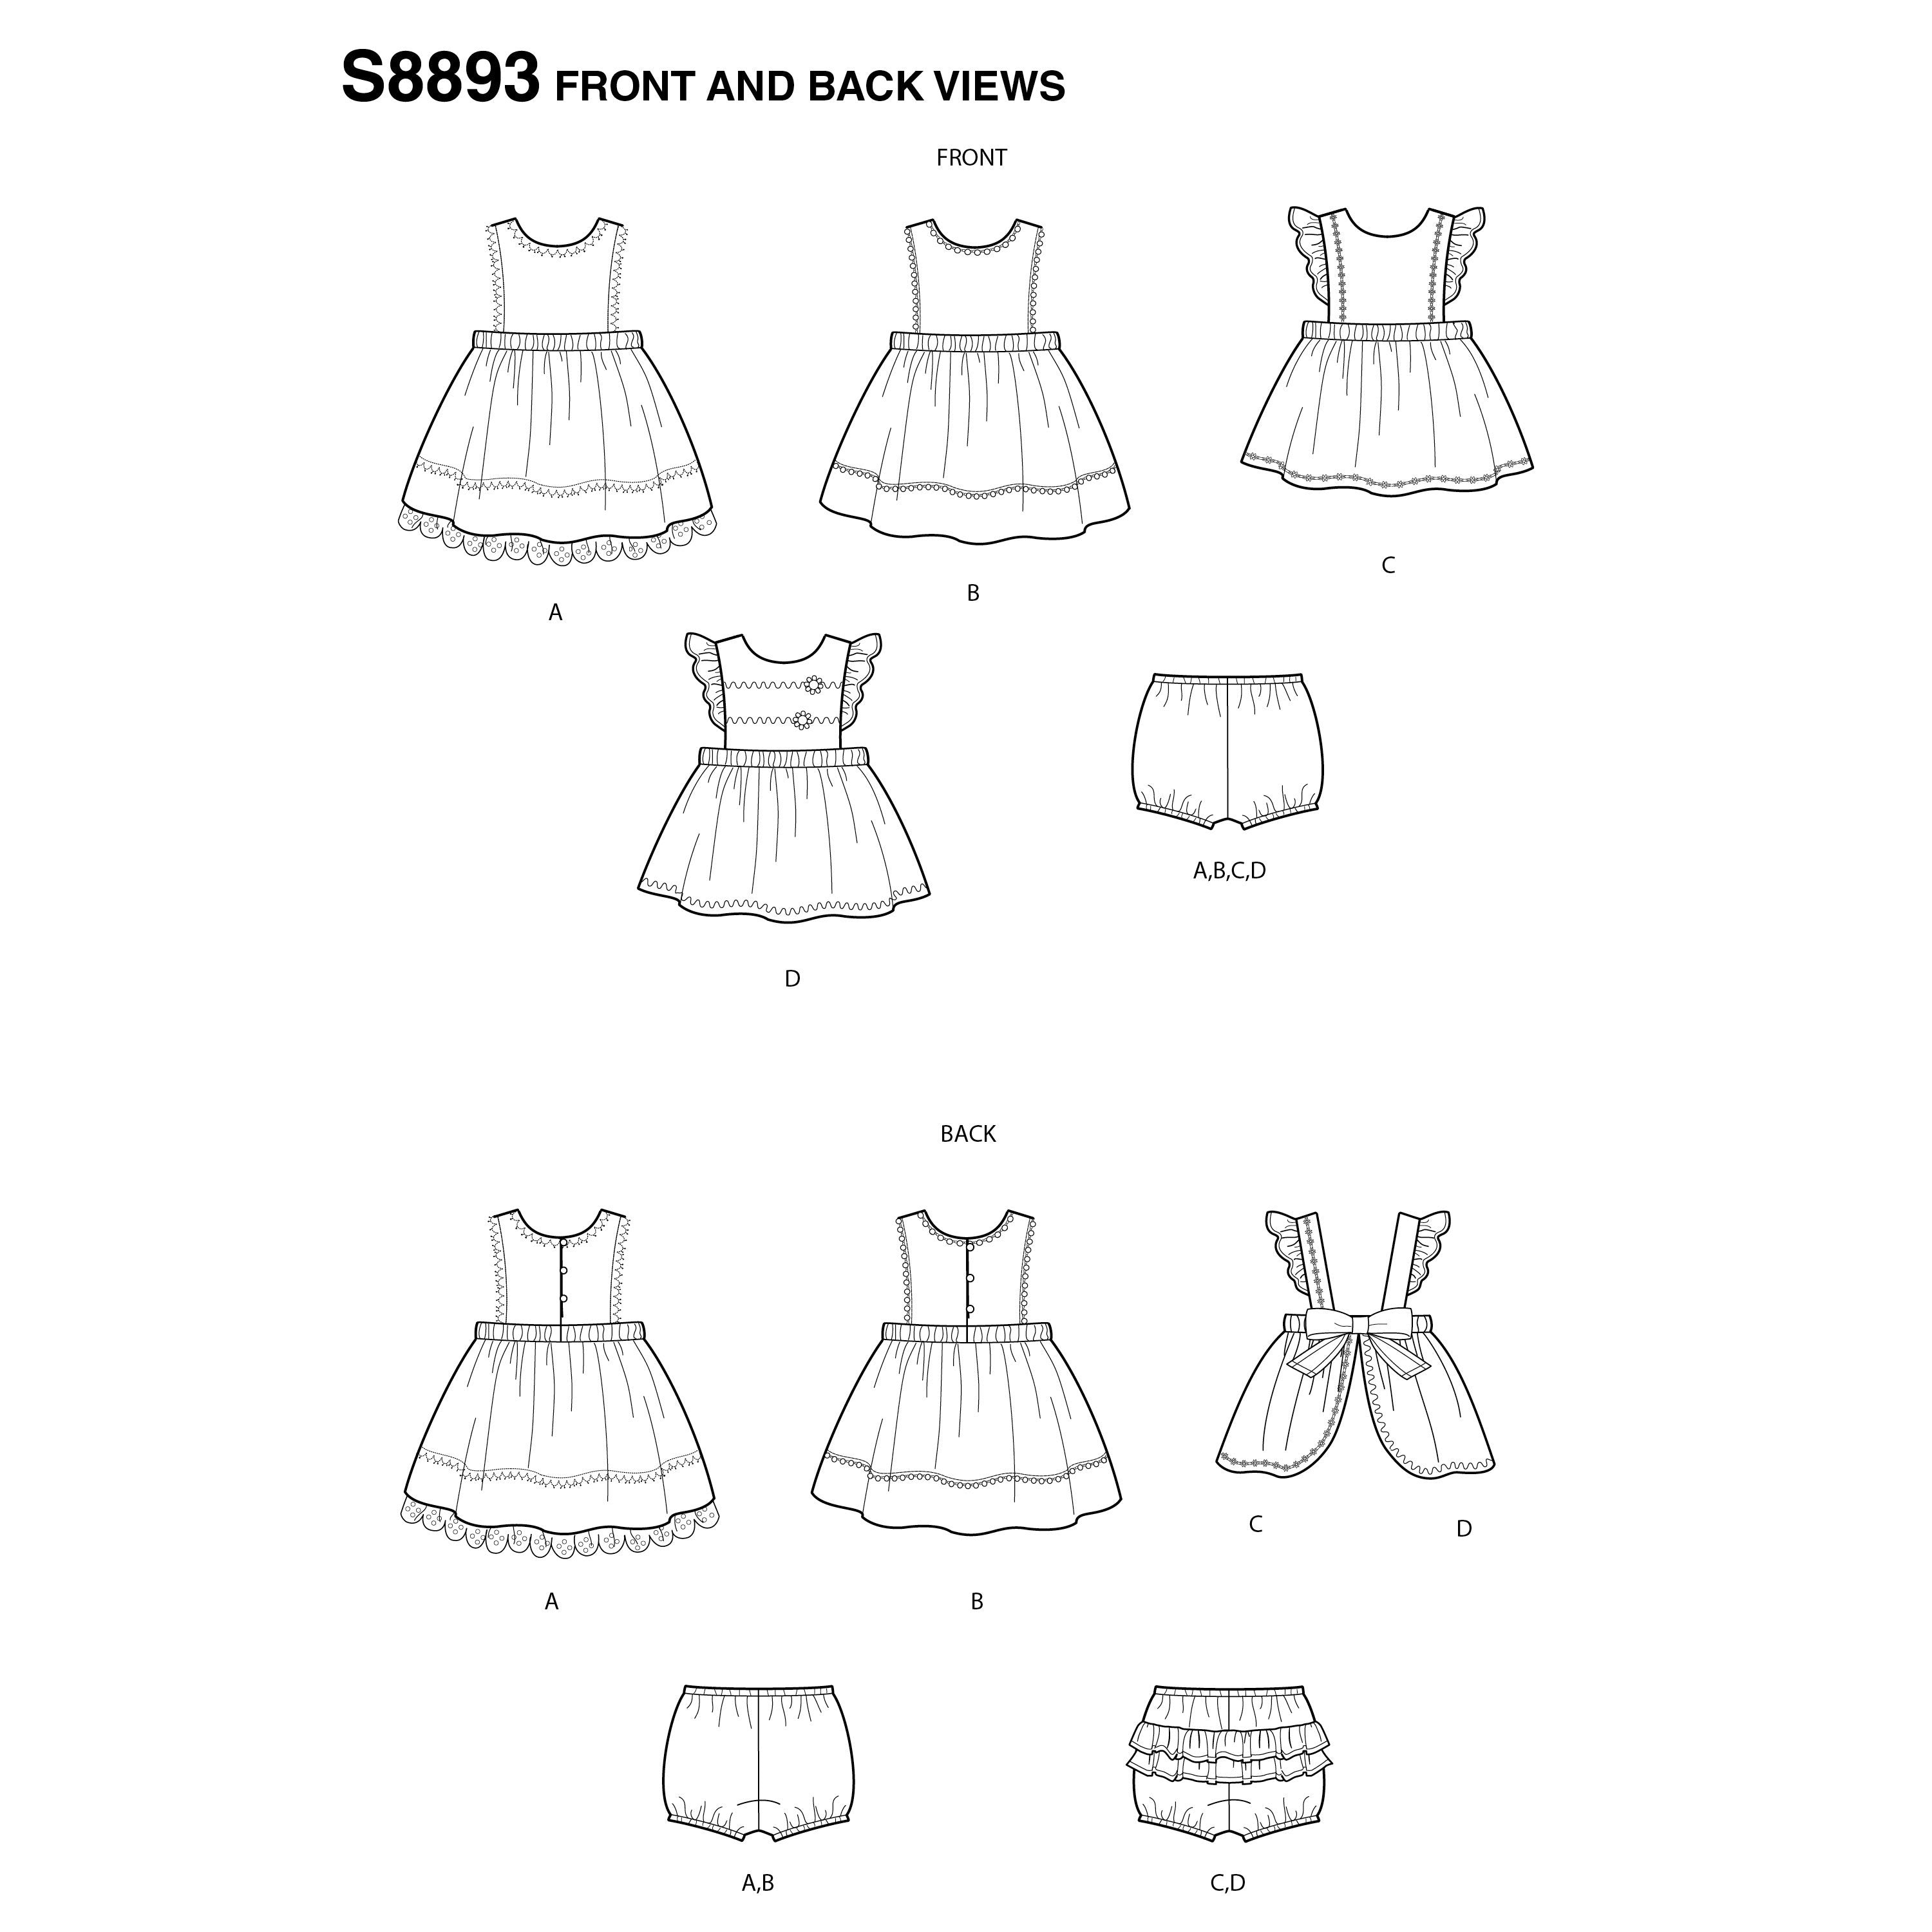 Simplicity Pattern 8893 Babies' Pinafores from Jaycotts Sewing Supplies